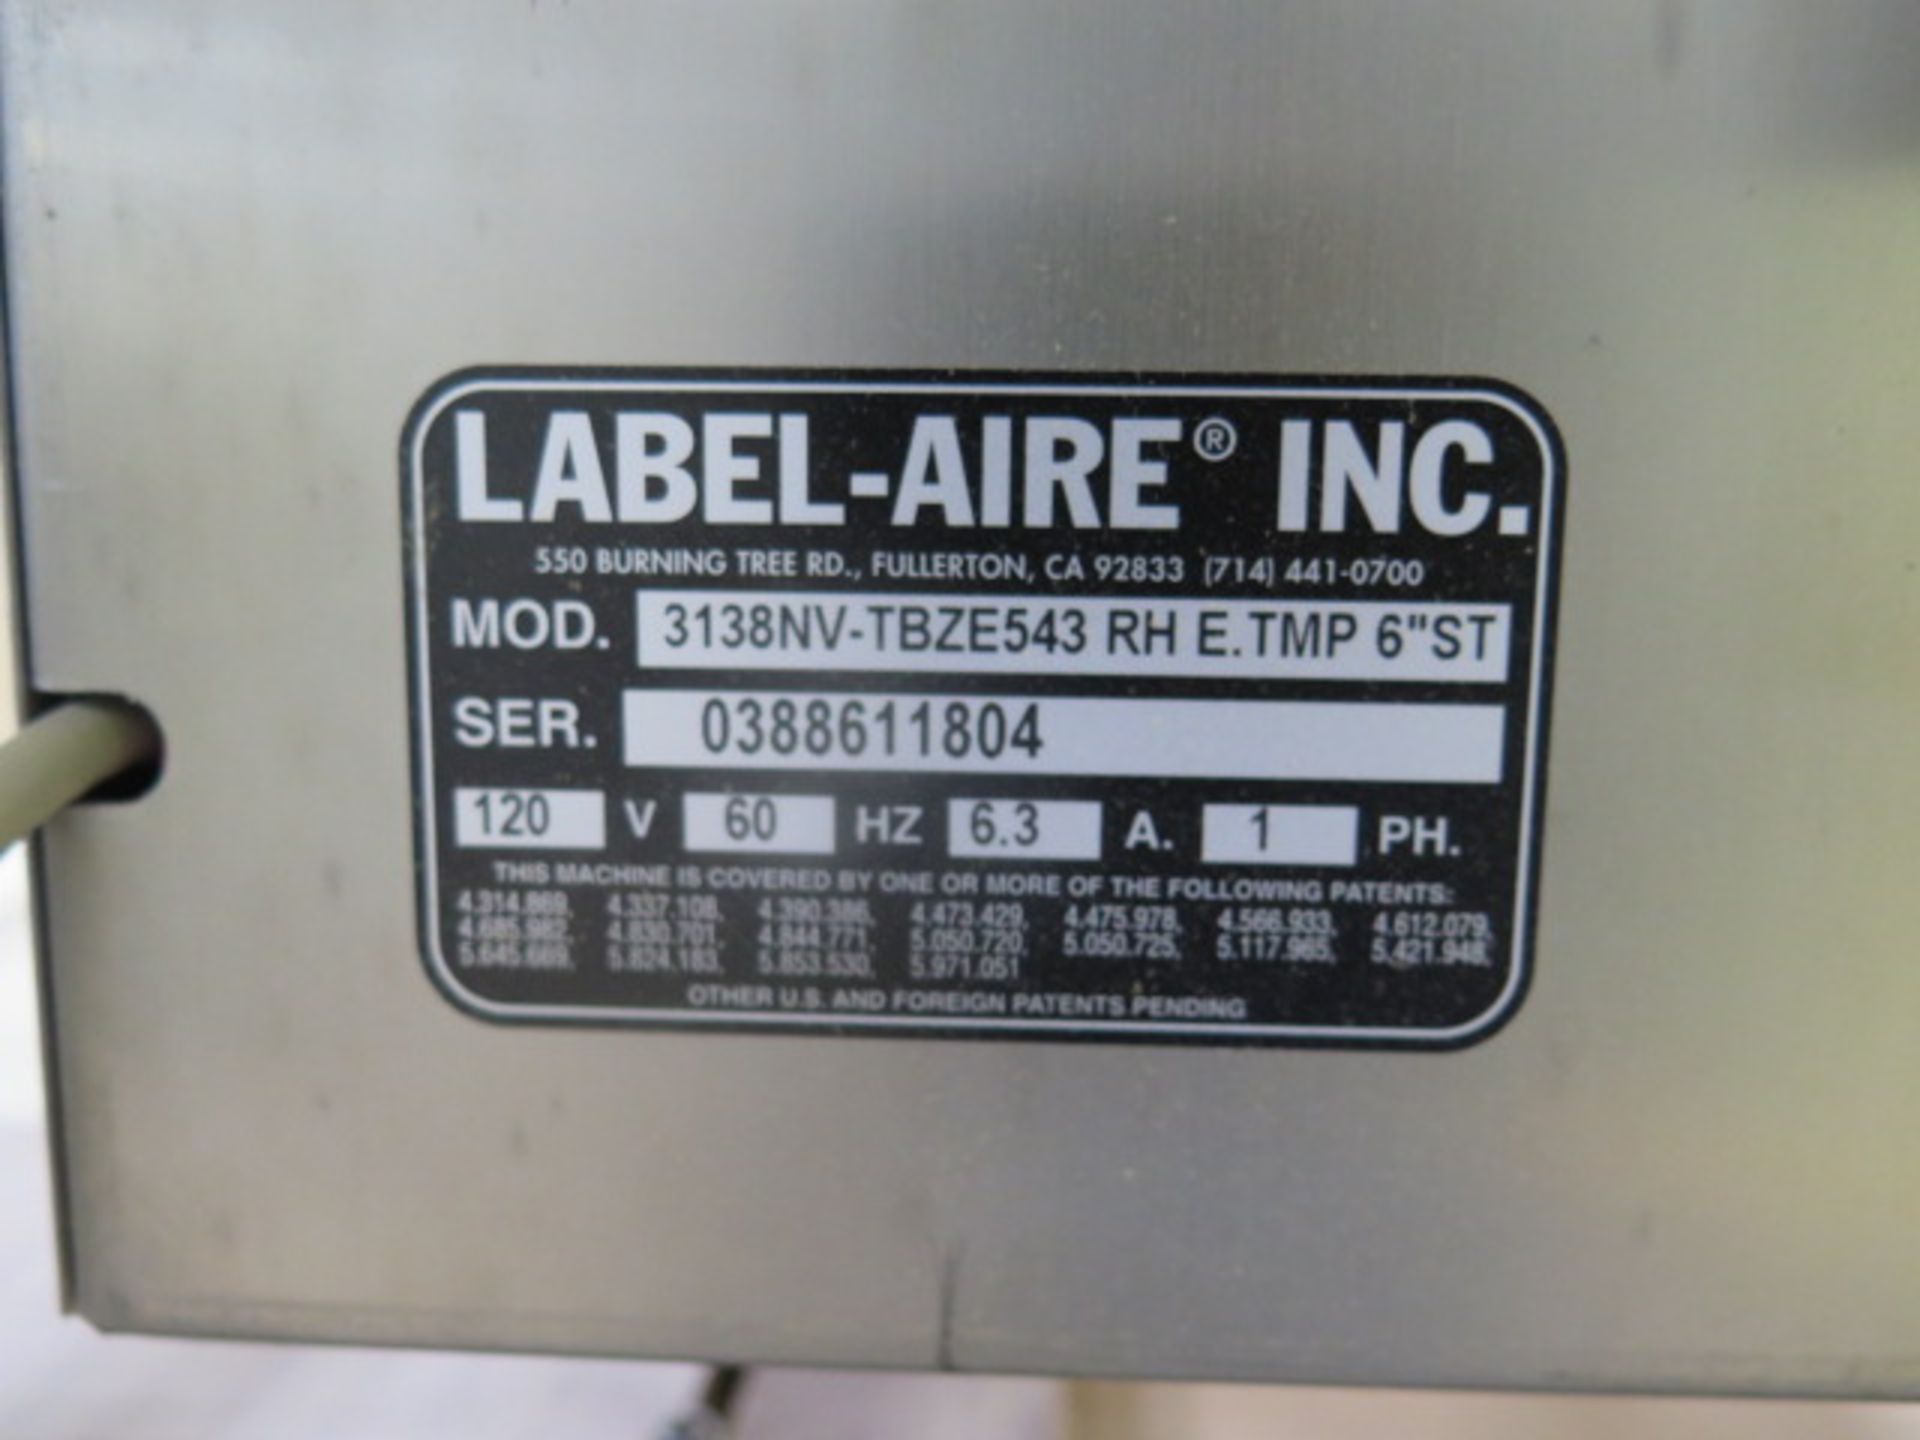 Custom Automatic Parts Labeling System w/ Label-Aire 3138NV-TBZE 534 RH E.TMP 6”ST Label, SOLD AS IS - Image 11 of 11